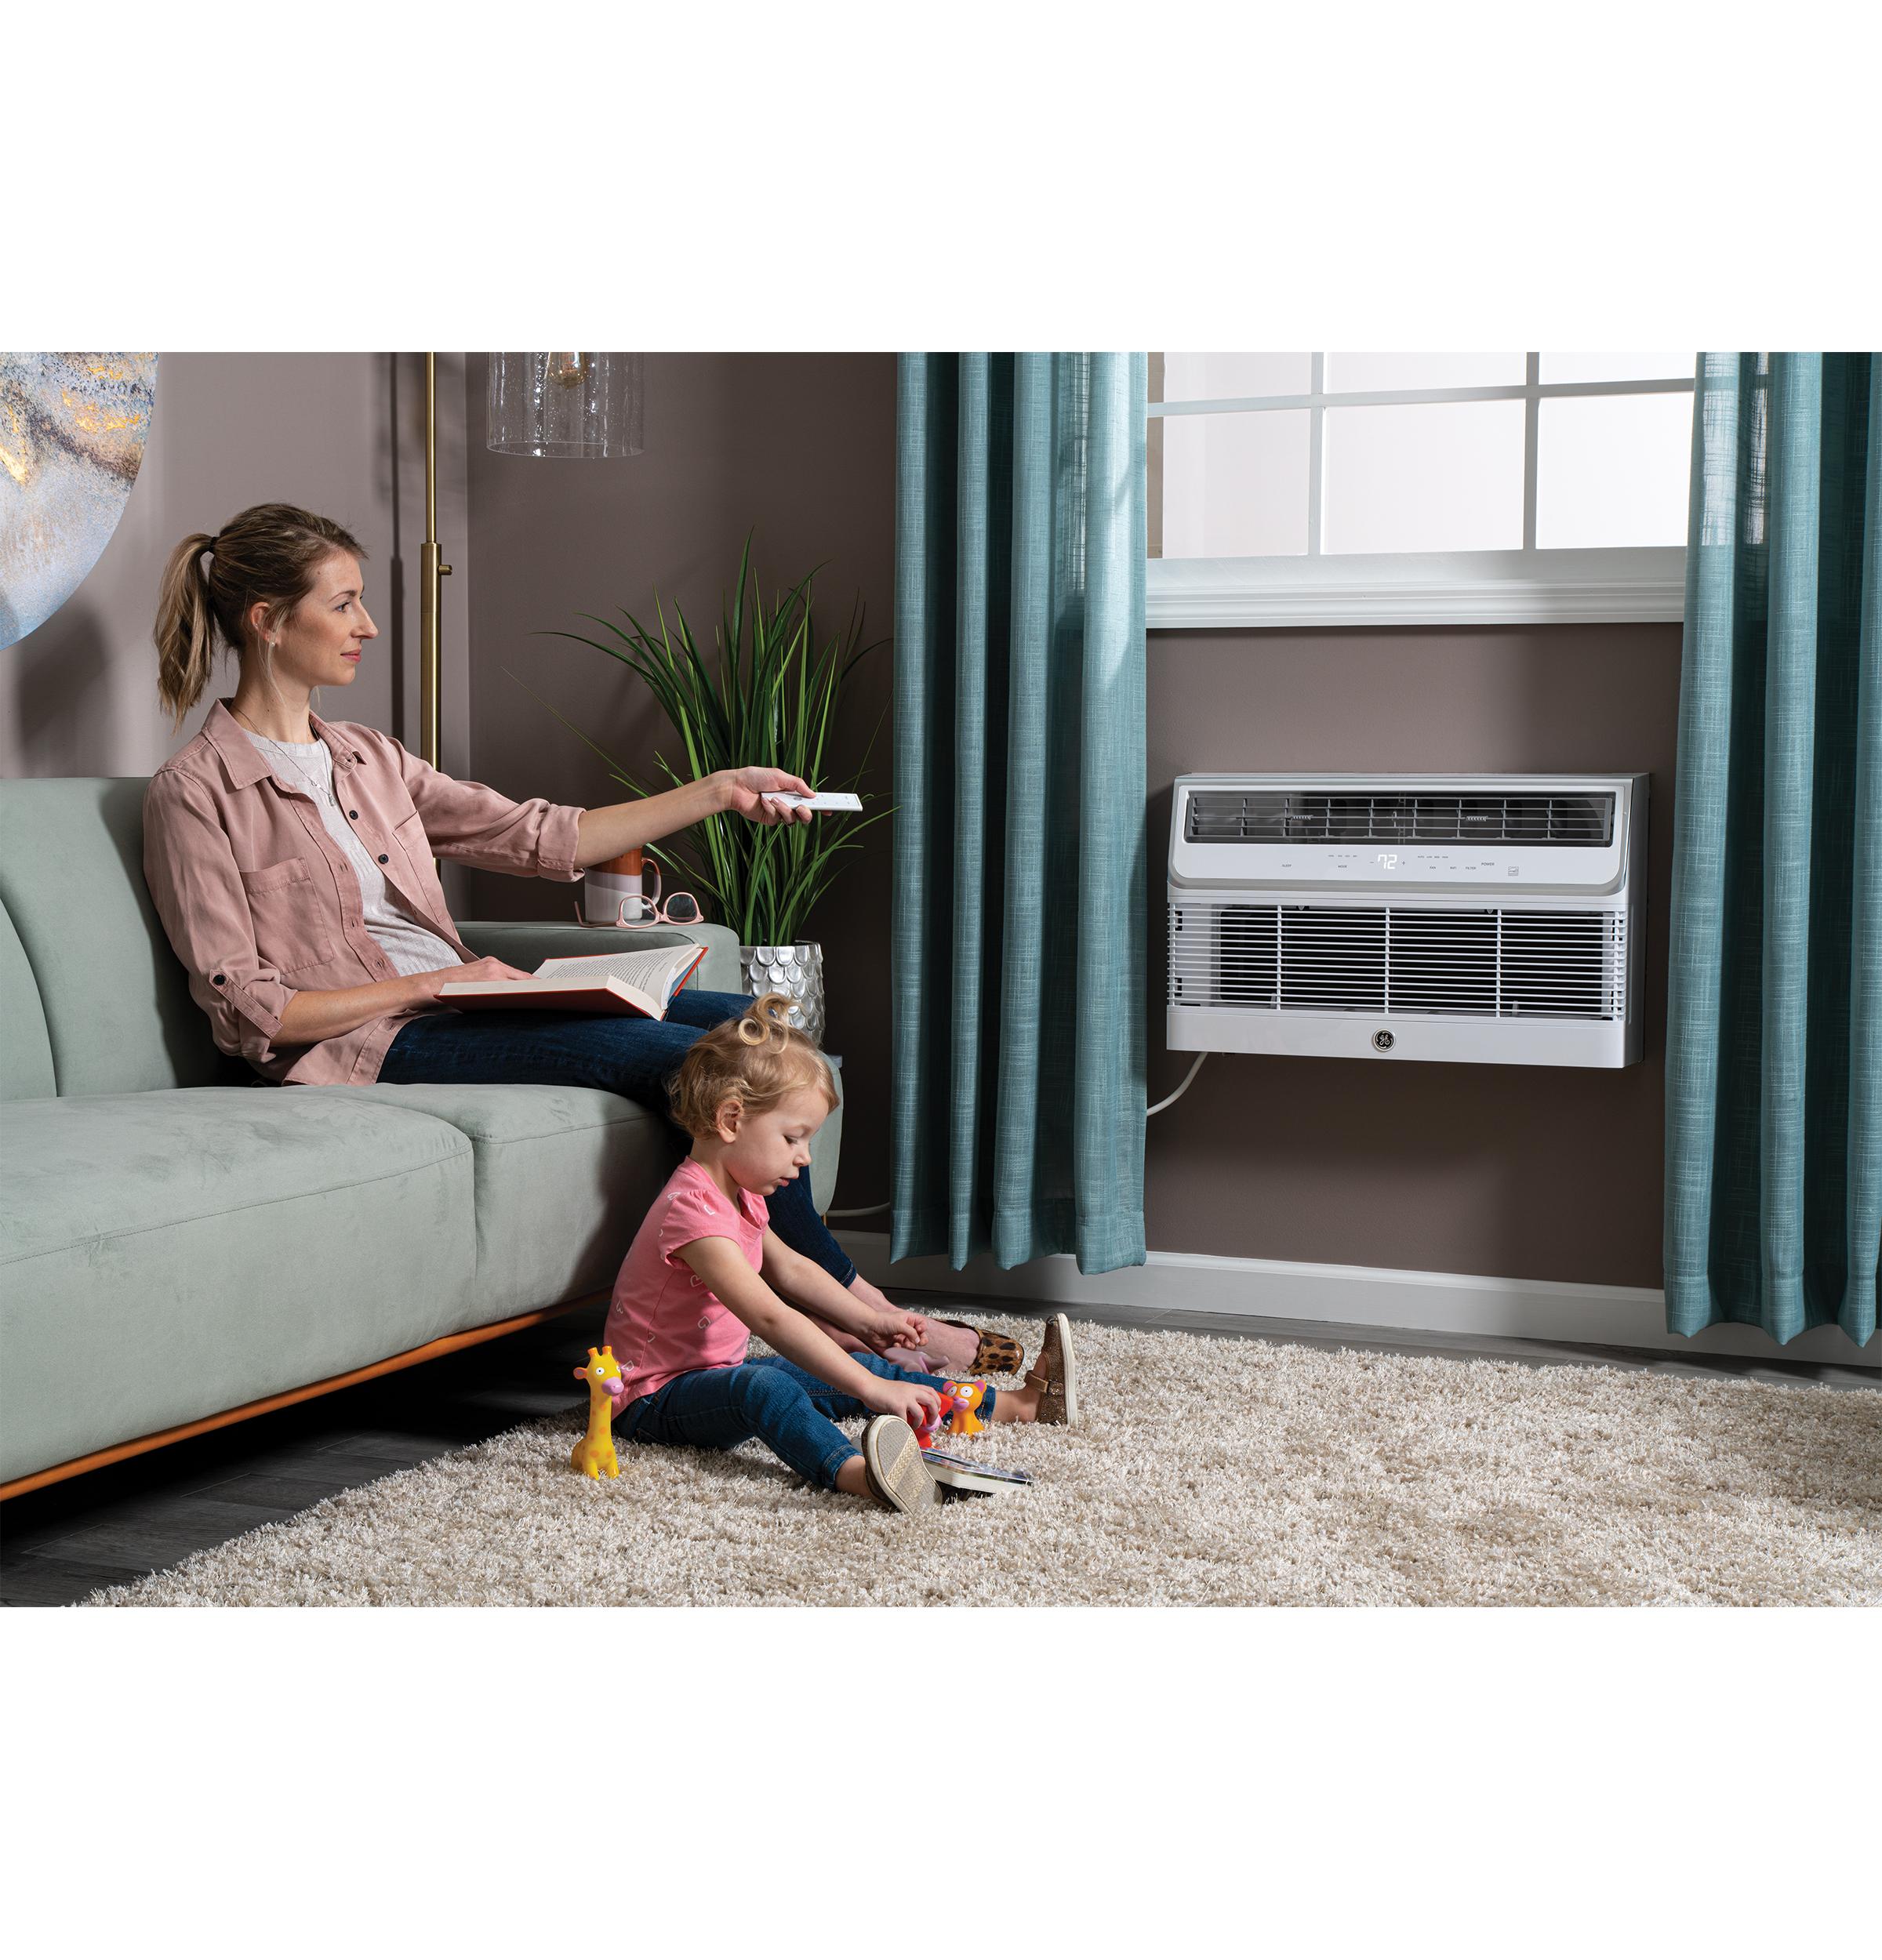 Ge Appliances AJCQ12DWJ Ge® 230/208 Volt Built-In Cool-Only Room Air Conditioner